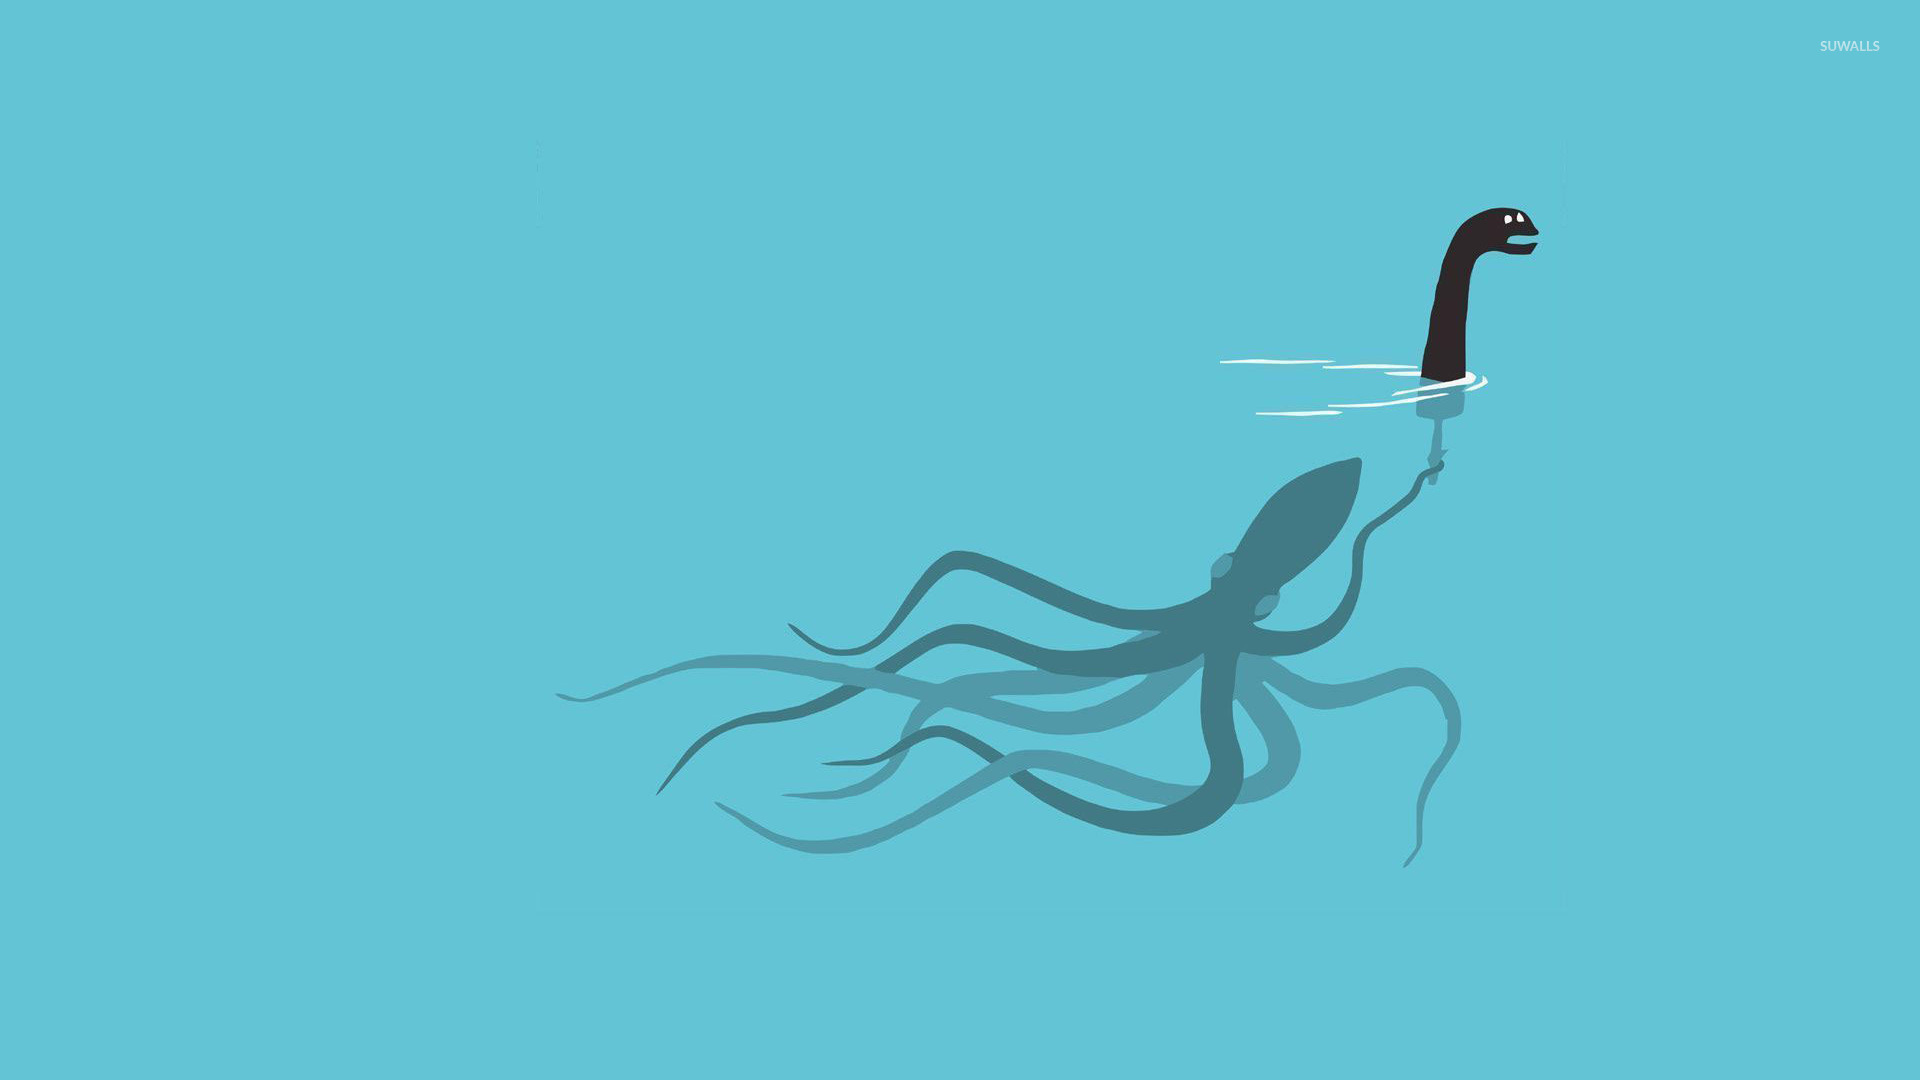 Giant squid playing as the Loch Ness Monster wallpaper   Funny